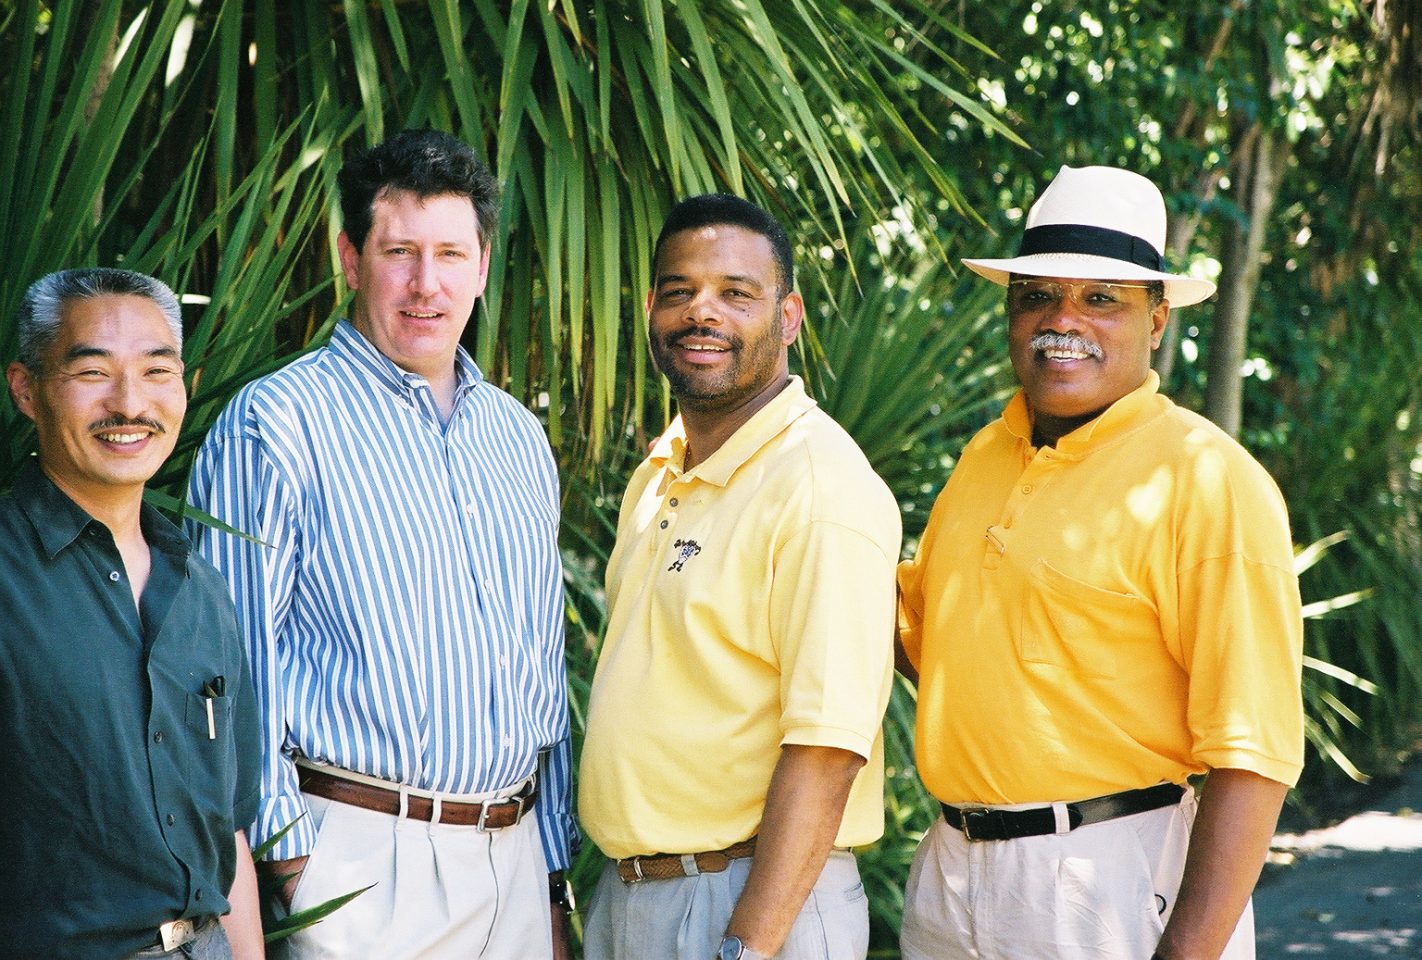 Four MWA Principals standing in front of palm trees. Photo represents MWA's diversity in leadership with one Asian principal, two Black principals, and one Caucasian principal.